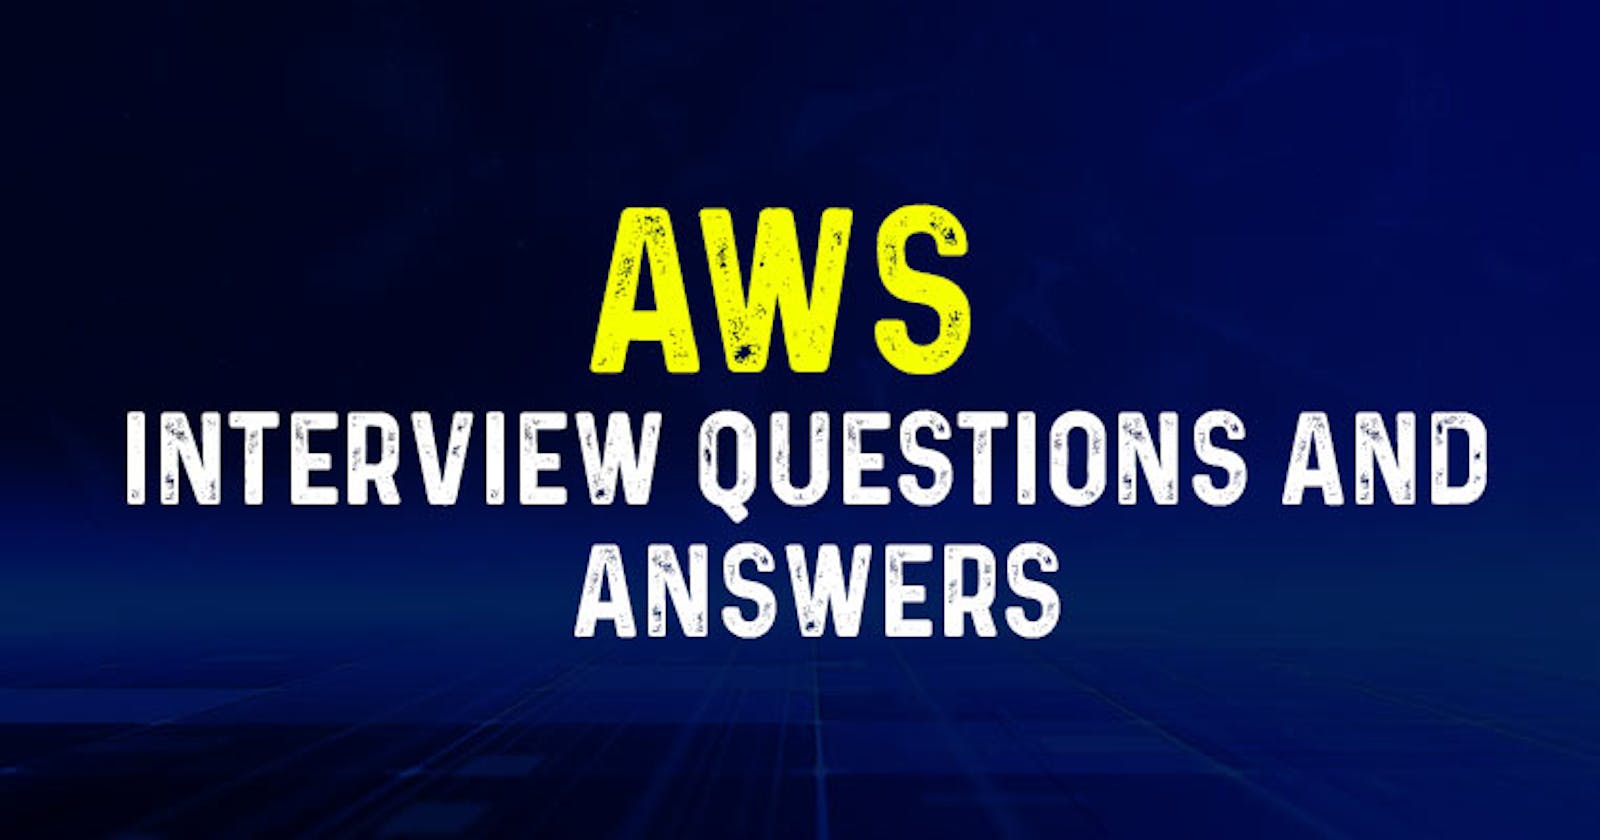 Day 49 - INTERVIEW QUESTIONS ON AWS 🚀